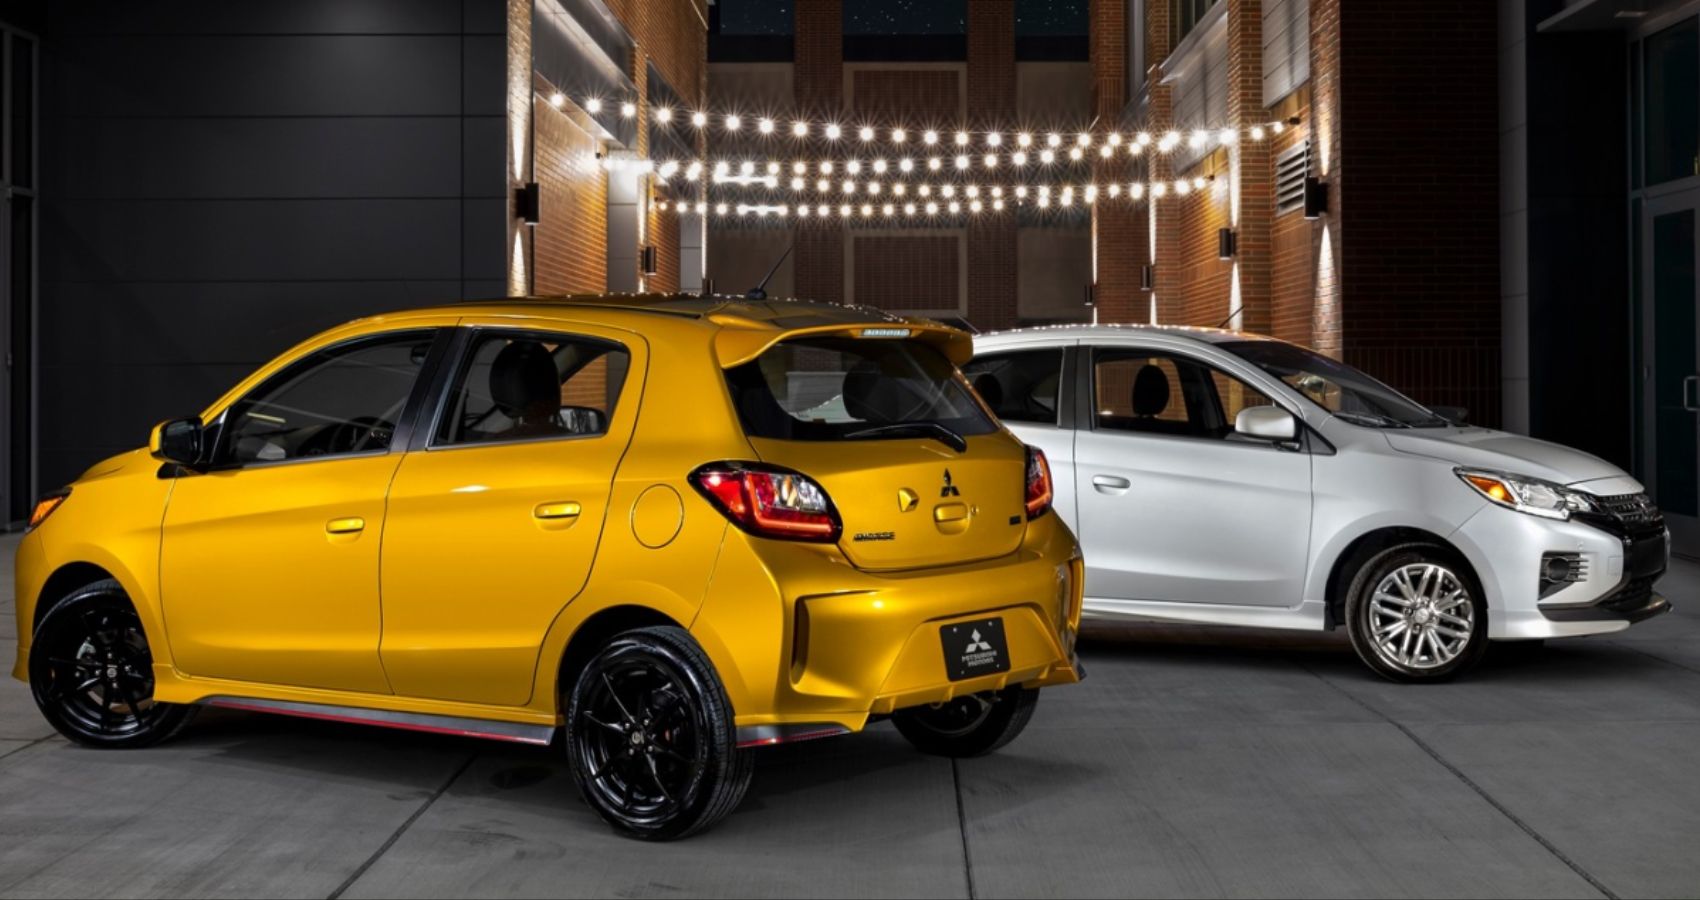 Mitsubishi Mirage Front And Rear View in yellow and white